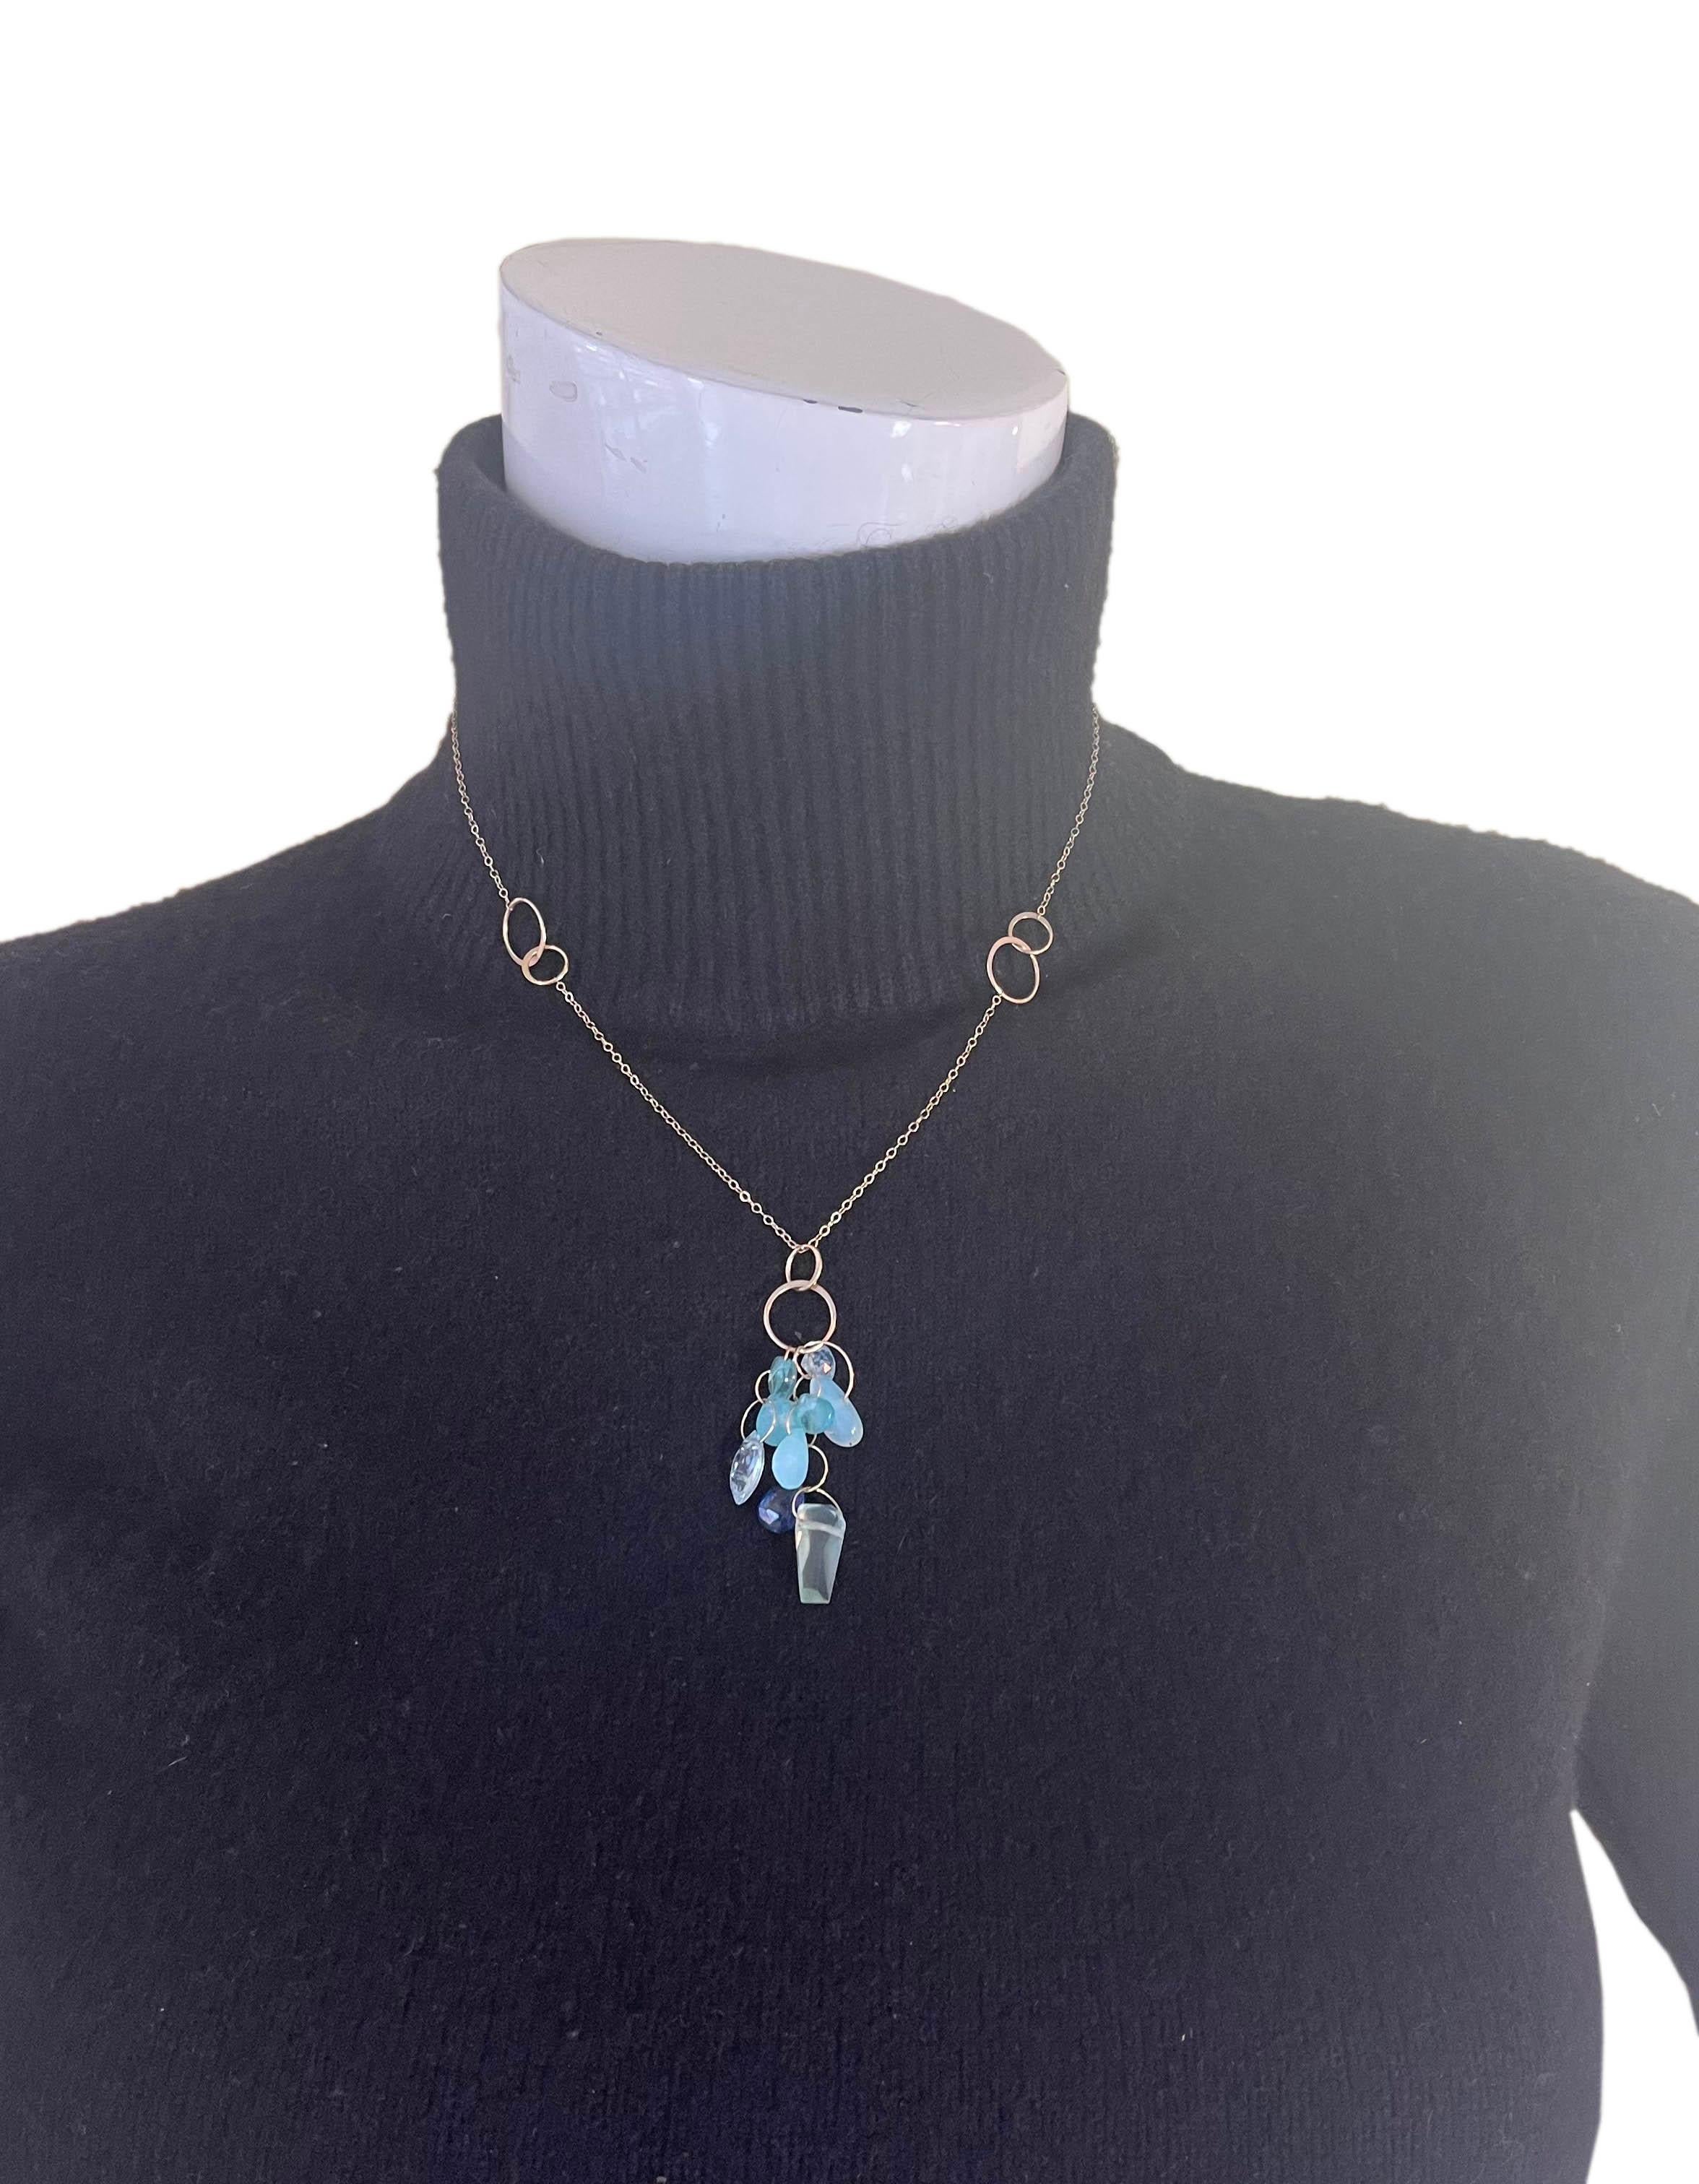 Melissa Joy Manning 14K Yellow Gold Chainlink Lariat w/Blue Topaz, Aquamarine, Lolite & Chalcedony Cluster Pendant
Made In: USA
Materials: 14K yellow gold, topaz, aquamarine, lolite, chalcedony
Closure/Opening: Hook
Overall Condition: